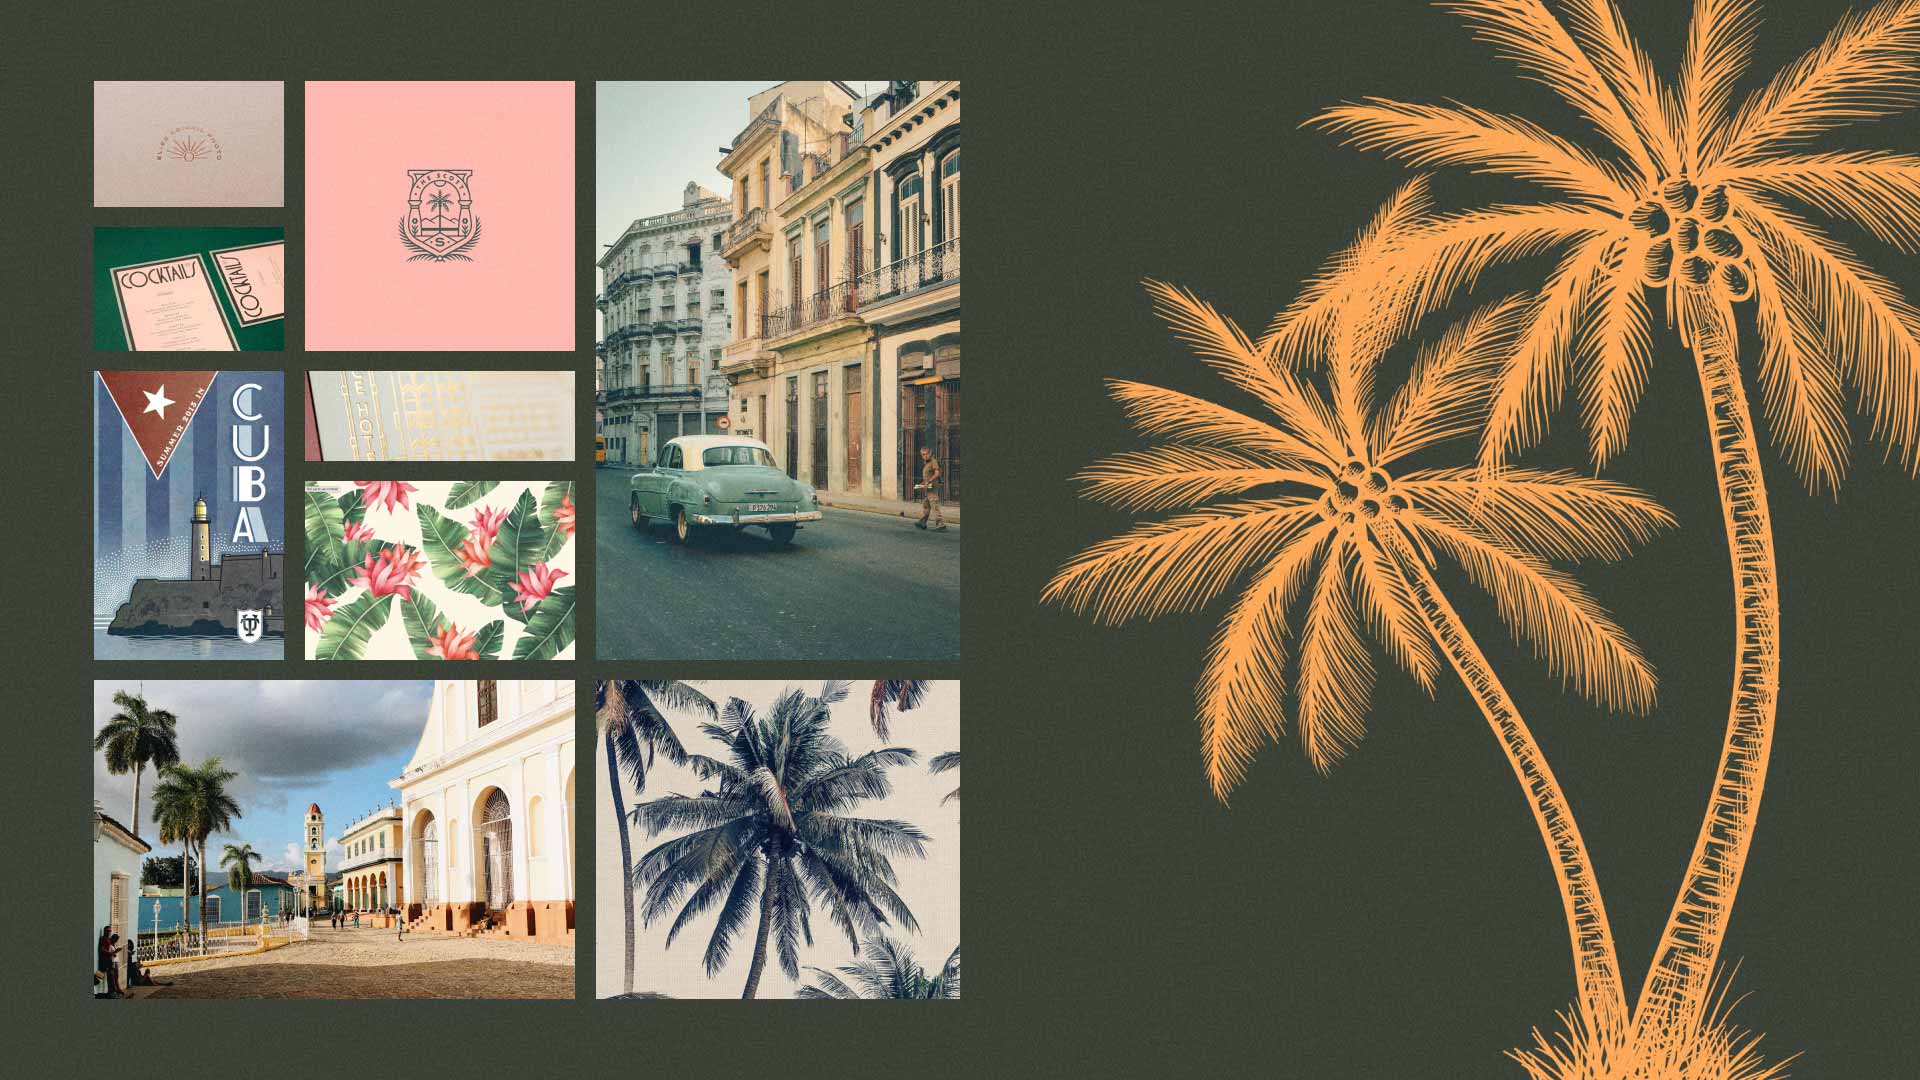 Moodboard for the First Gala with a collage of photos on left and palm tree illustration on right